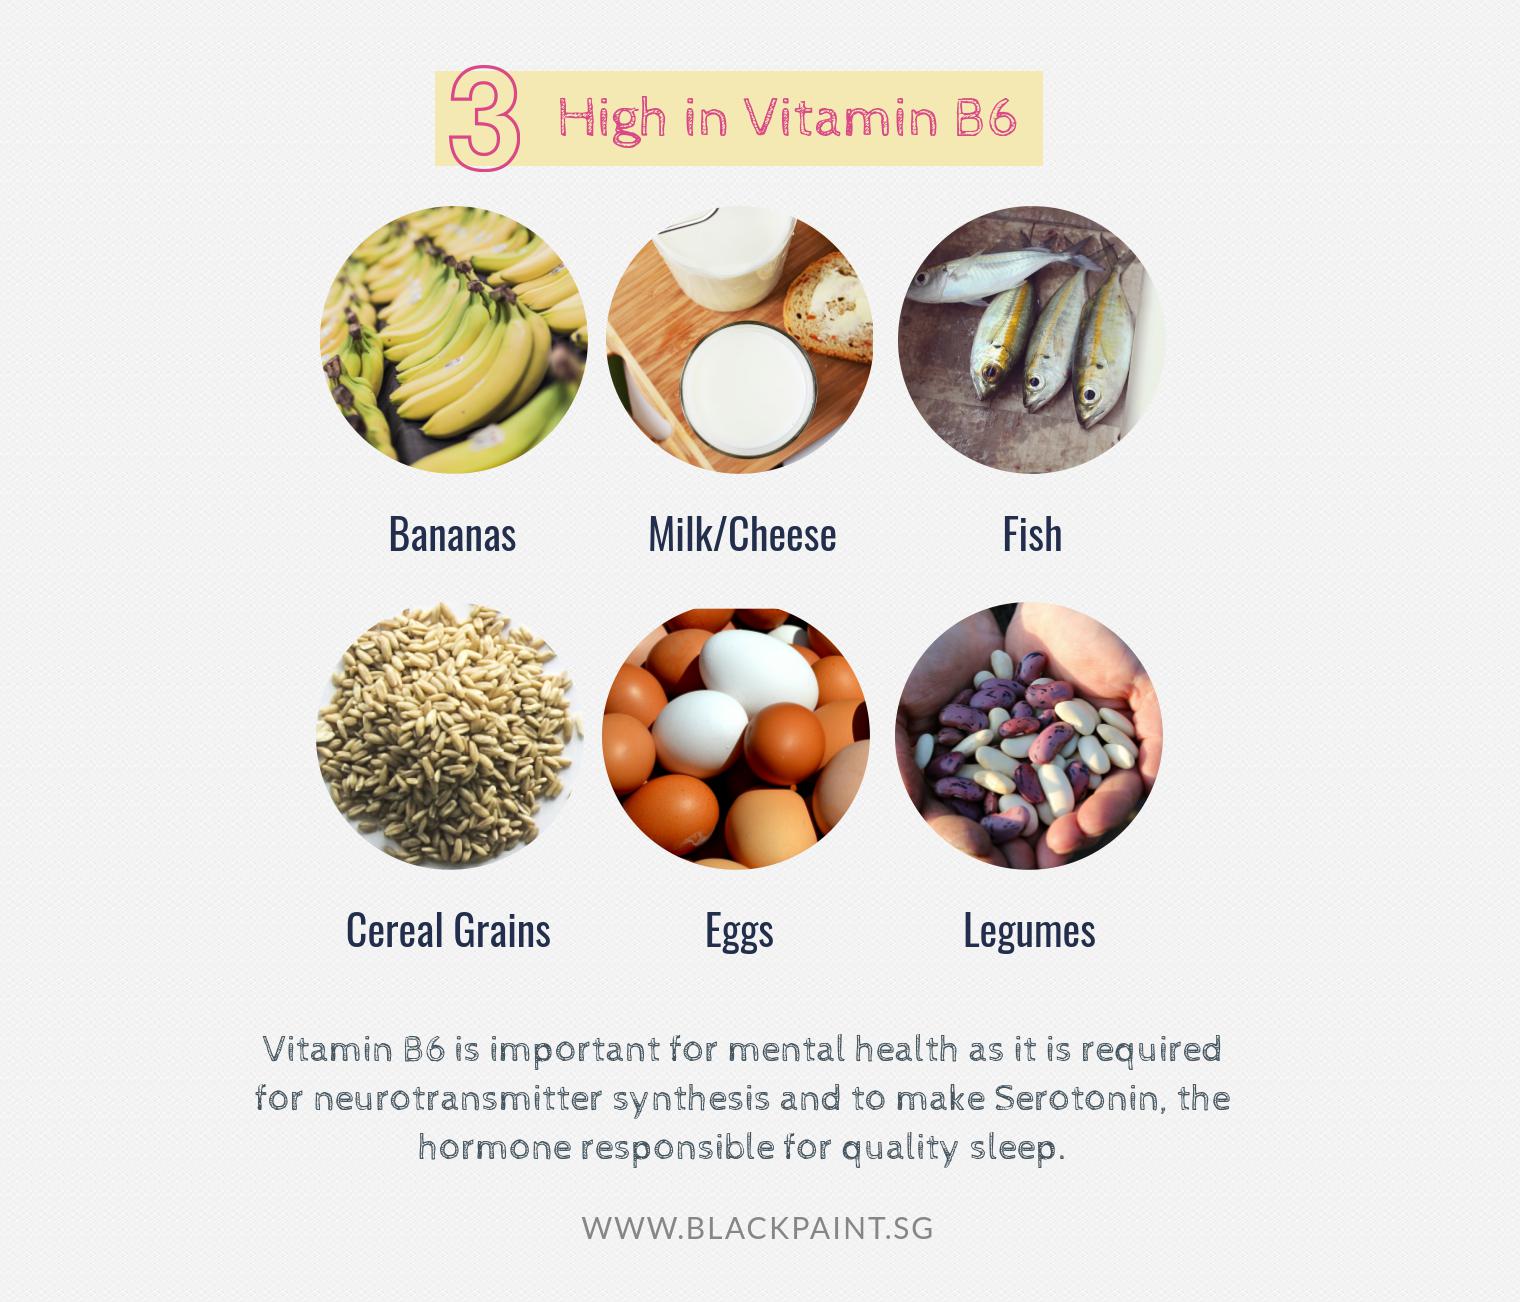 illustration of choosing foods that are high in vitamin B6